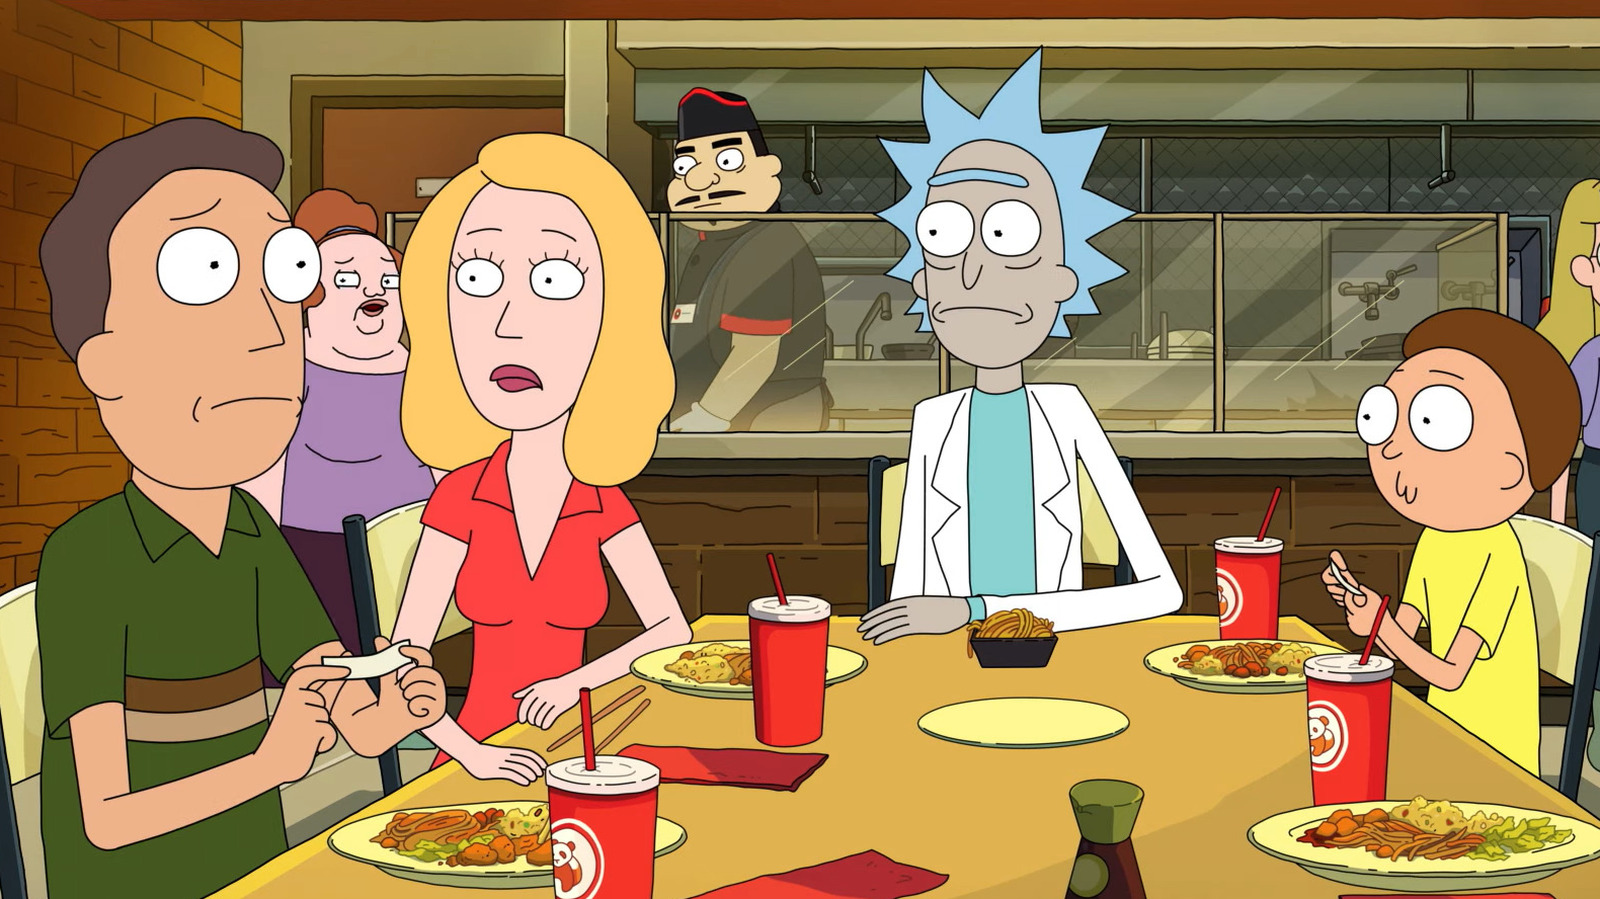 How Son Incest Episodes - So, What's Up With All The Incest In Rick And Morty Lately?